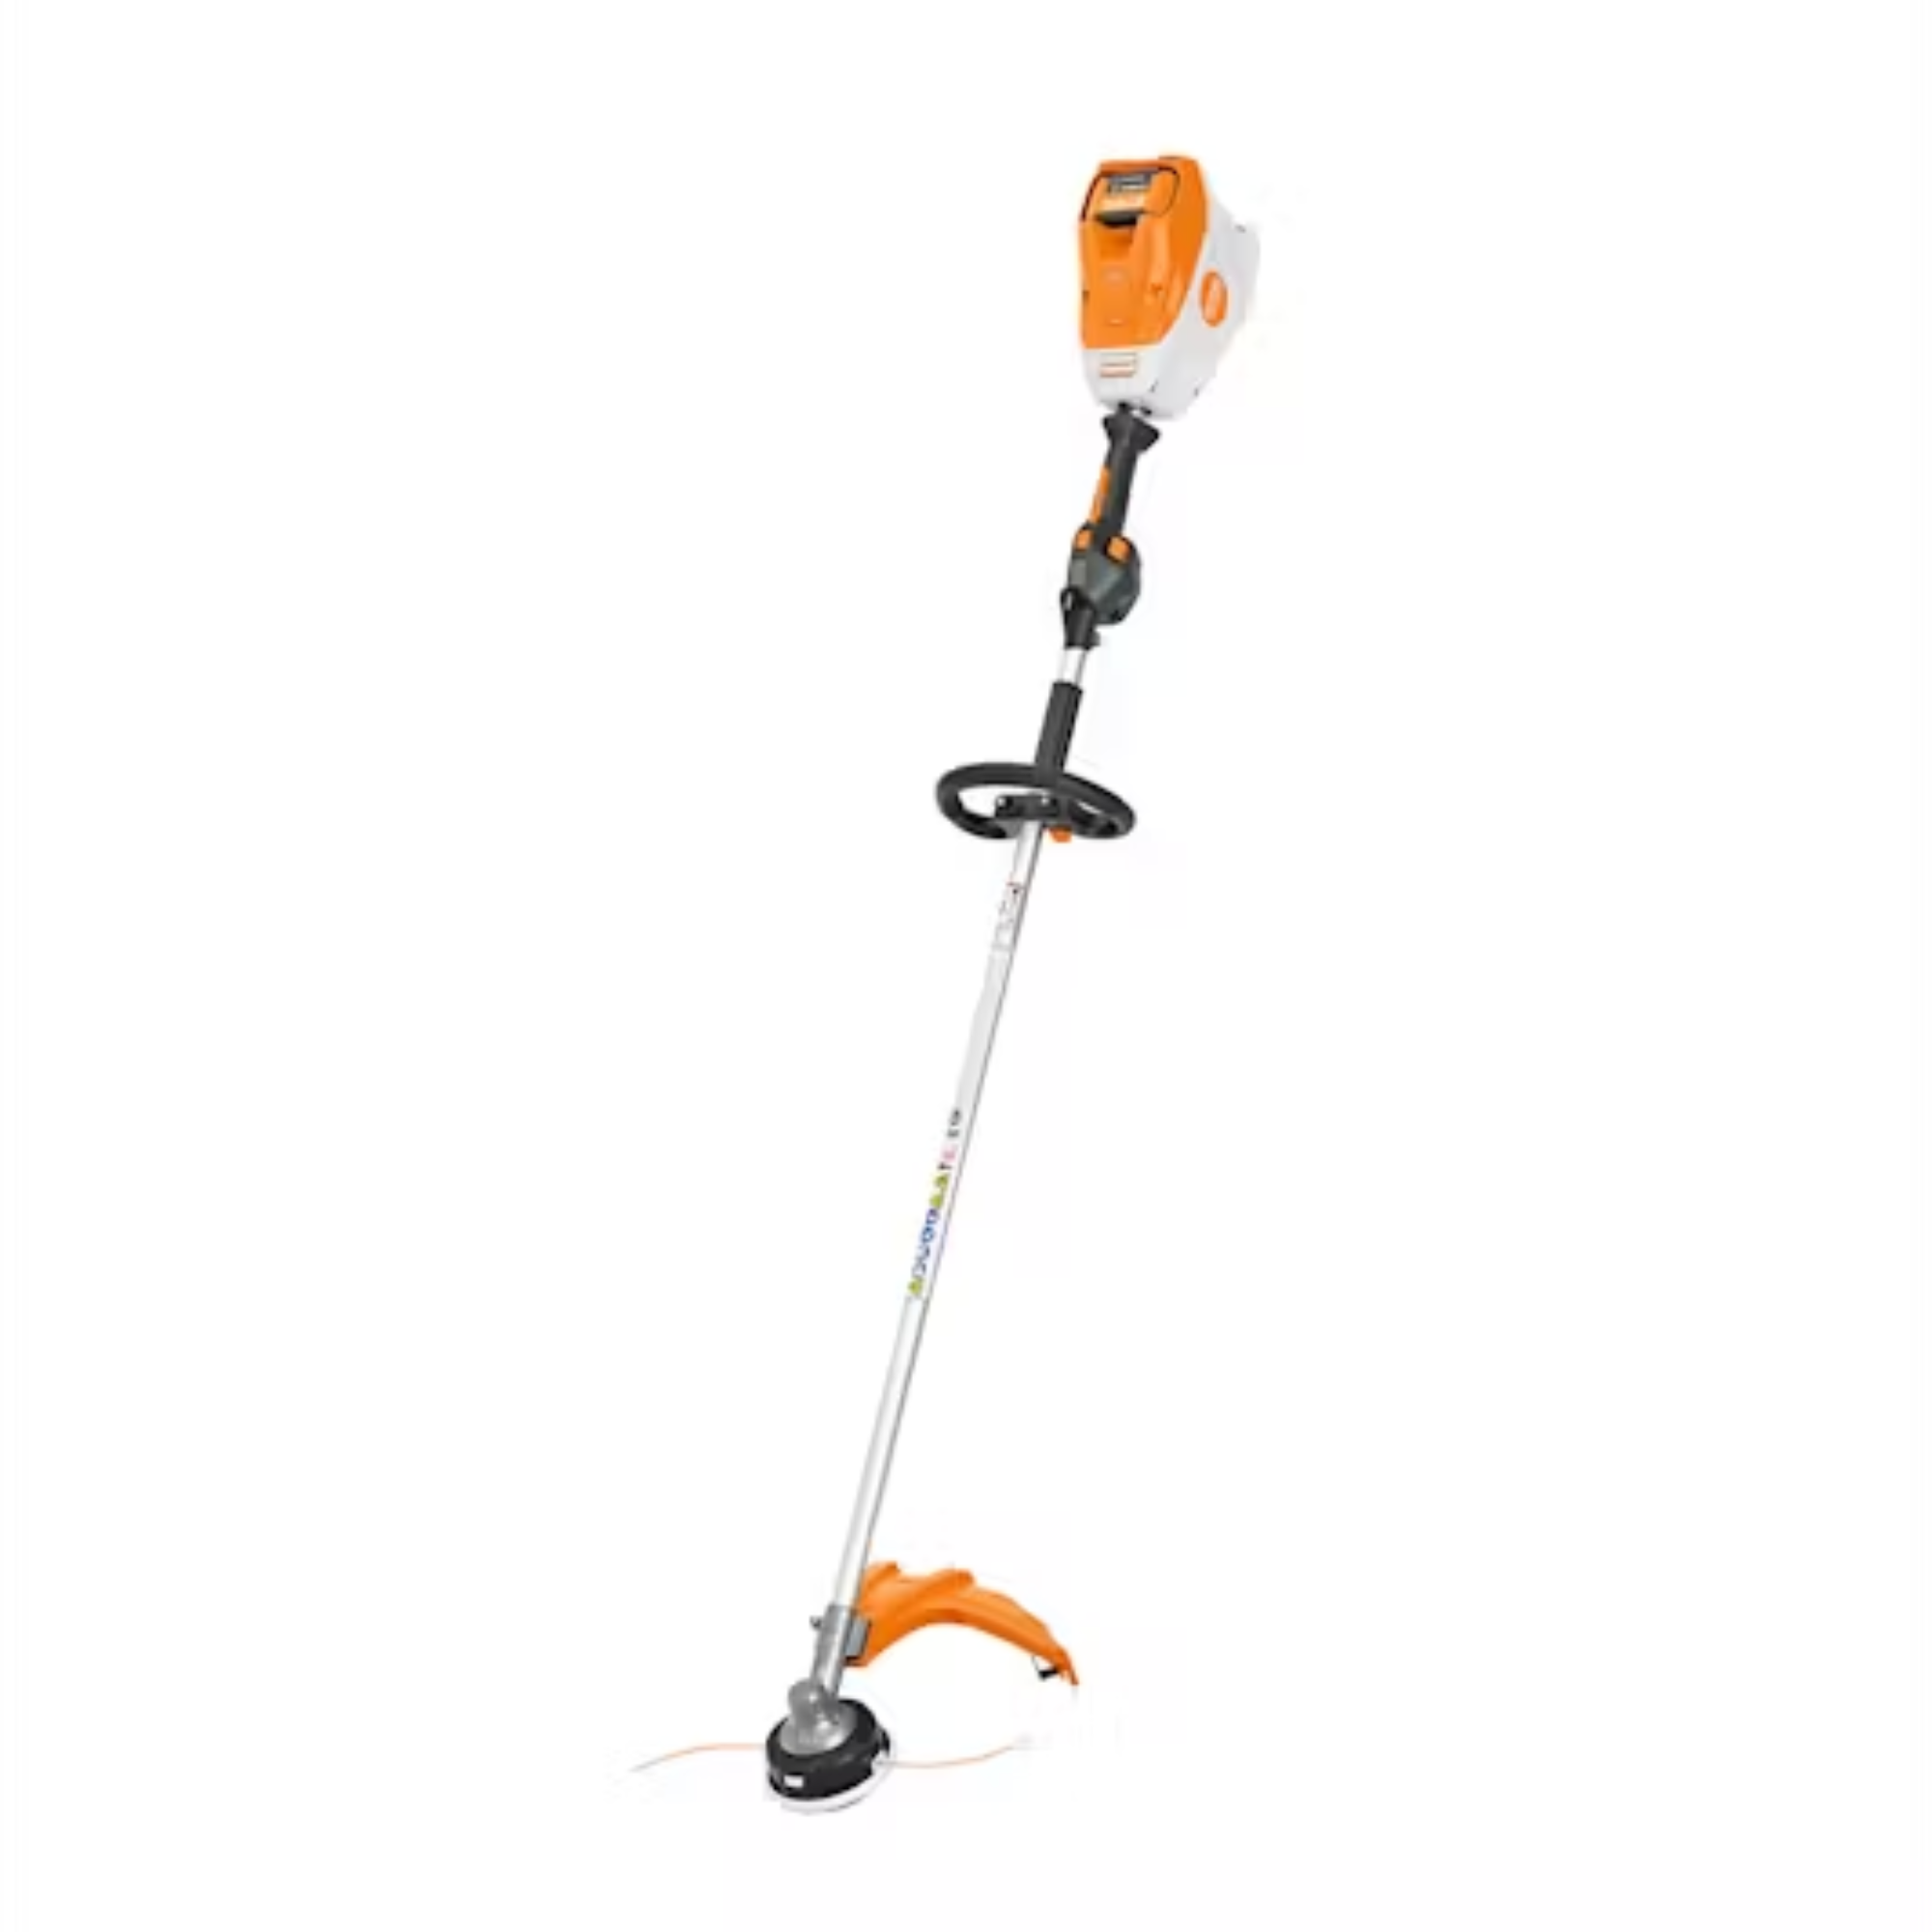 Stihl FSA 200 R Battery Powered Trimmer | Tool Only